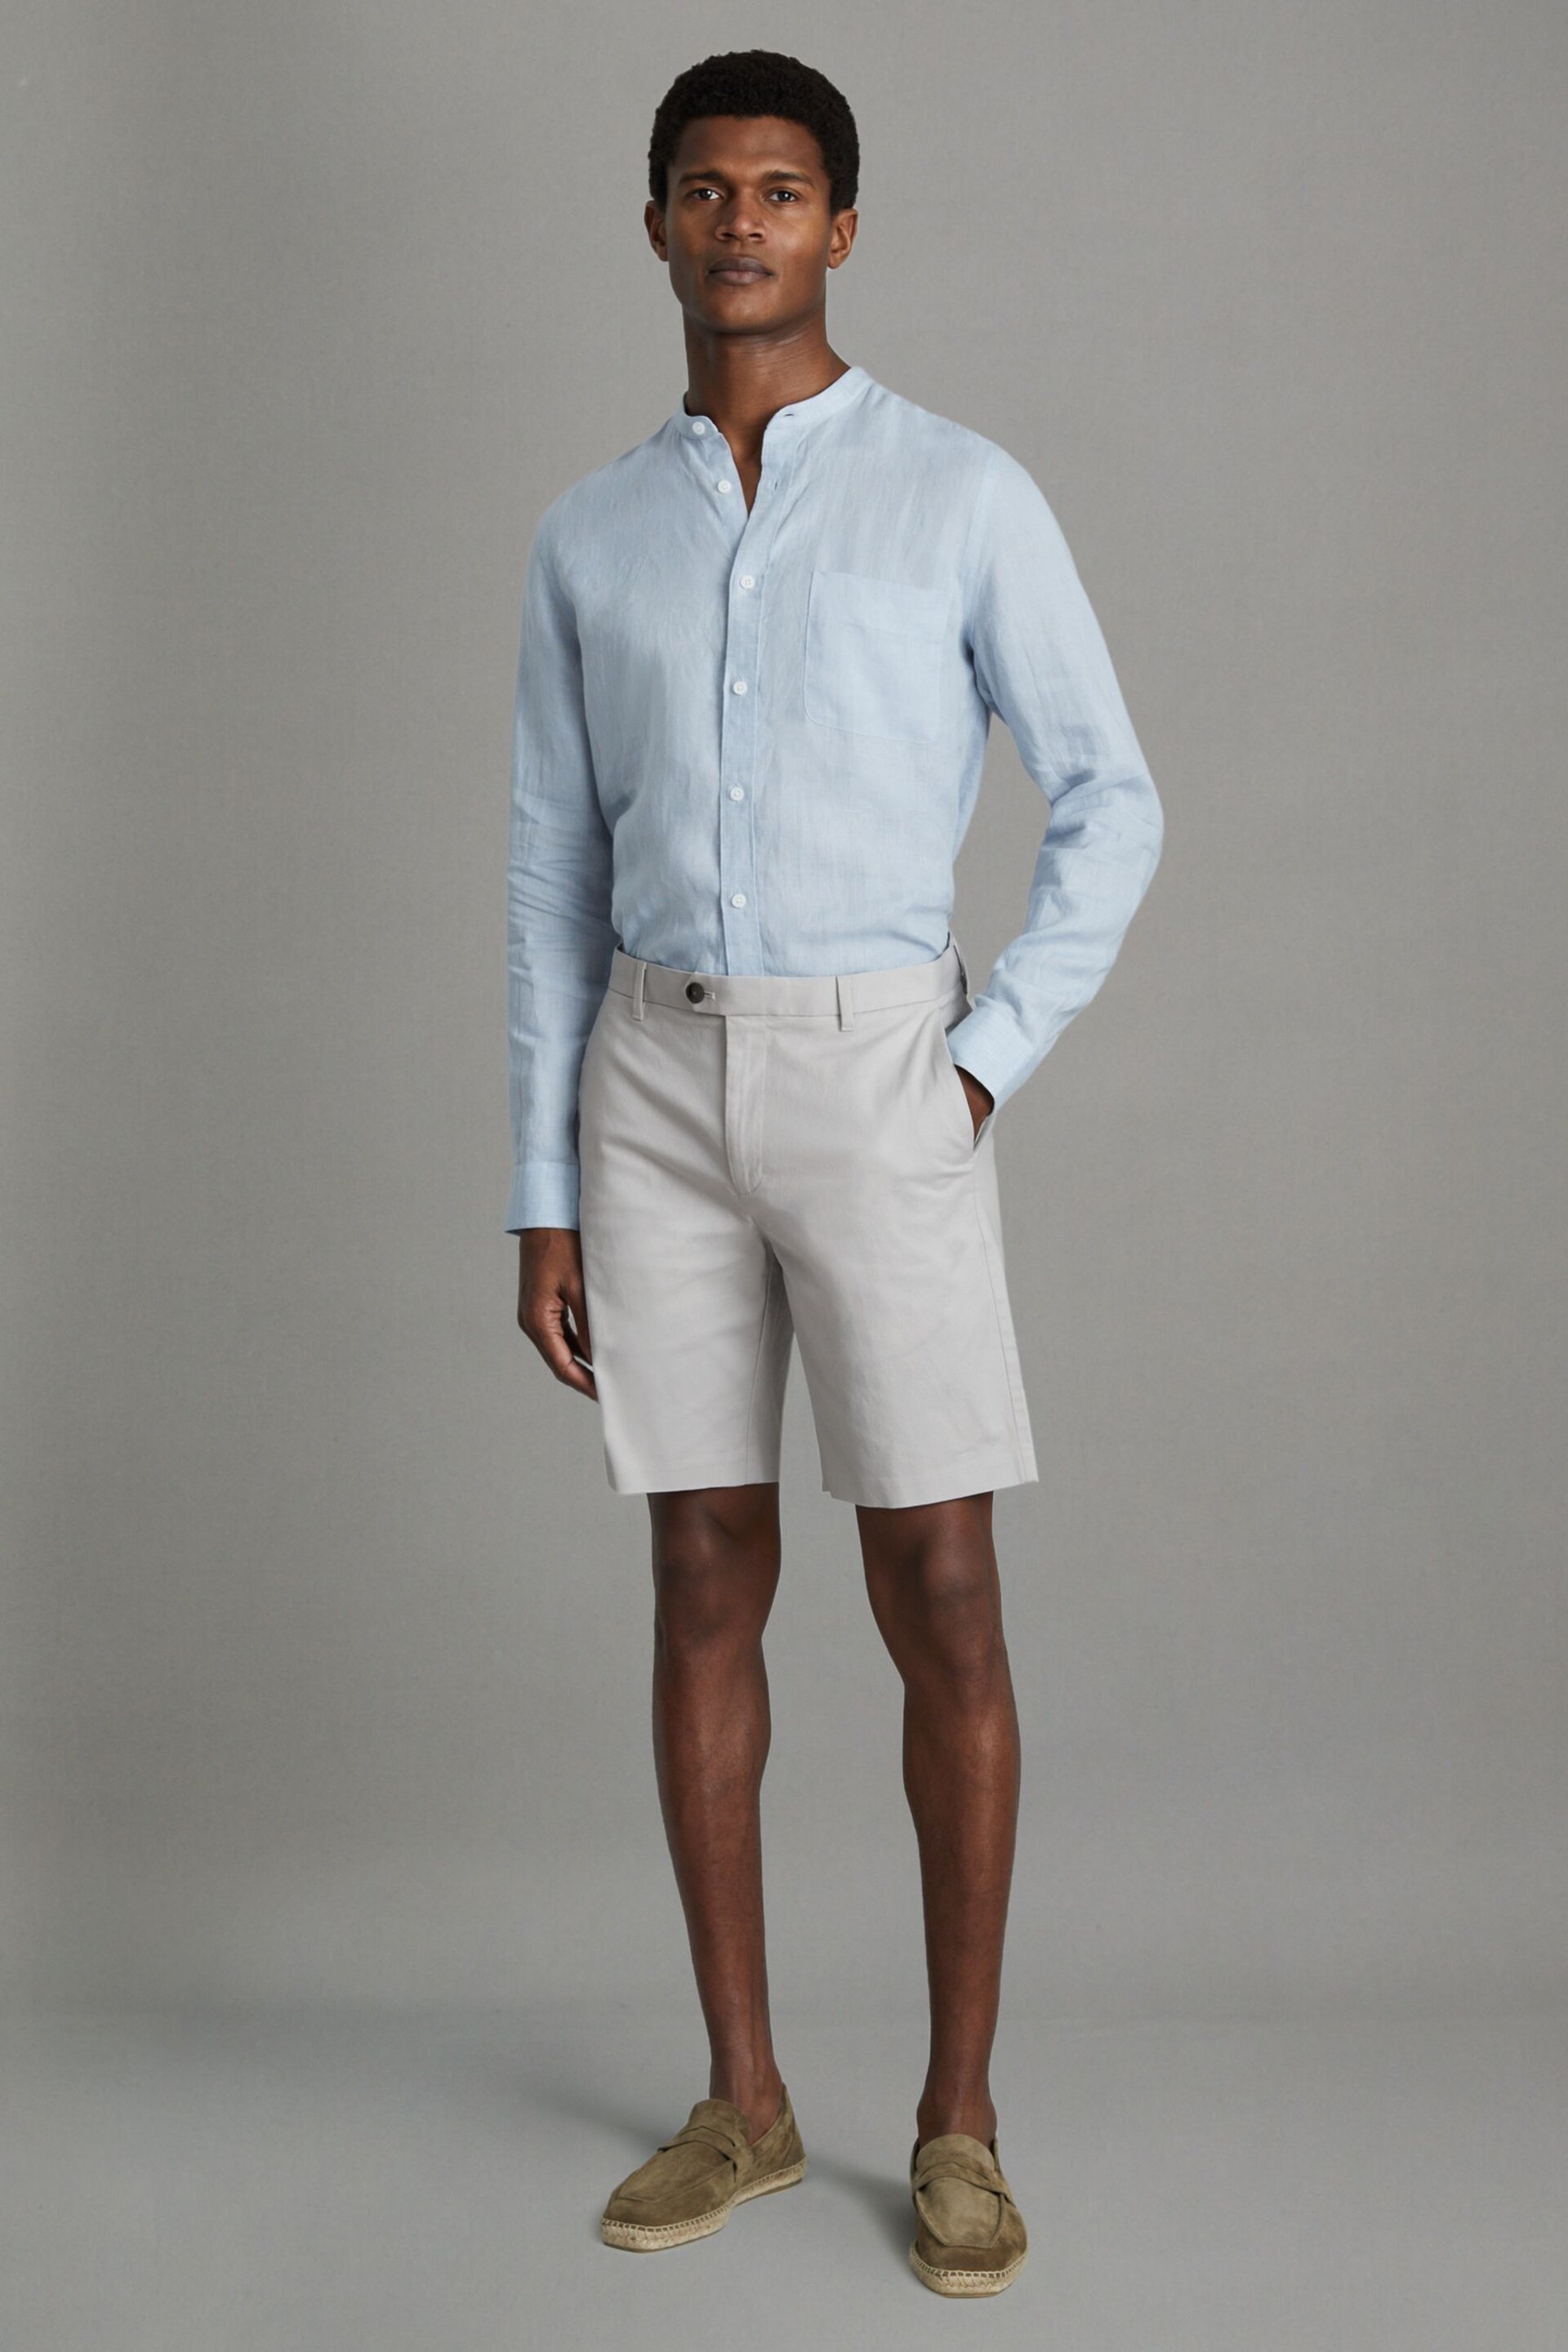 Reiss Ice Grey Wicket Modern Fit Cotton Blend Chino Shorts - Image 3 of 6